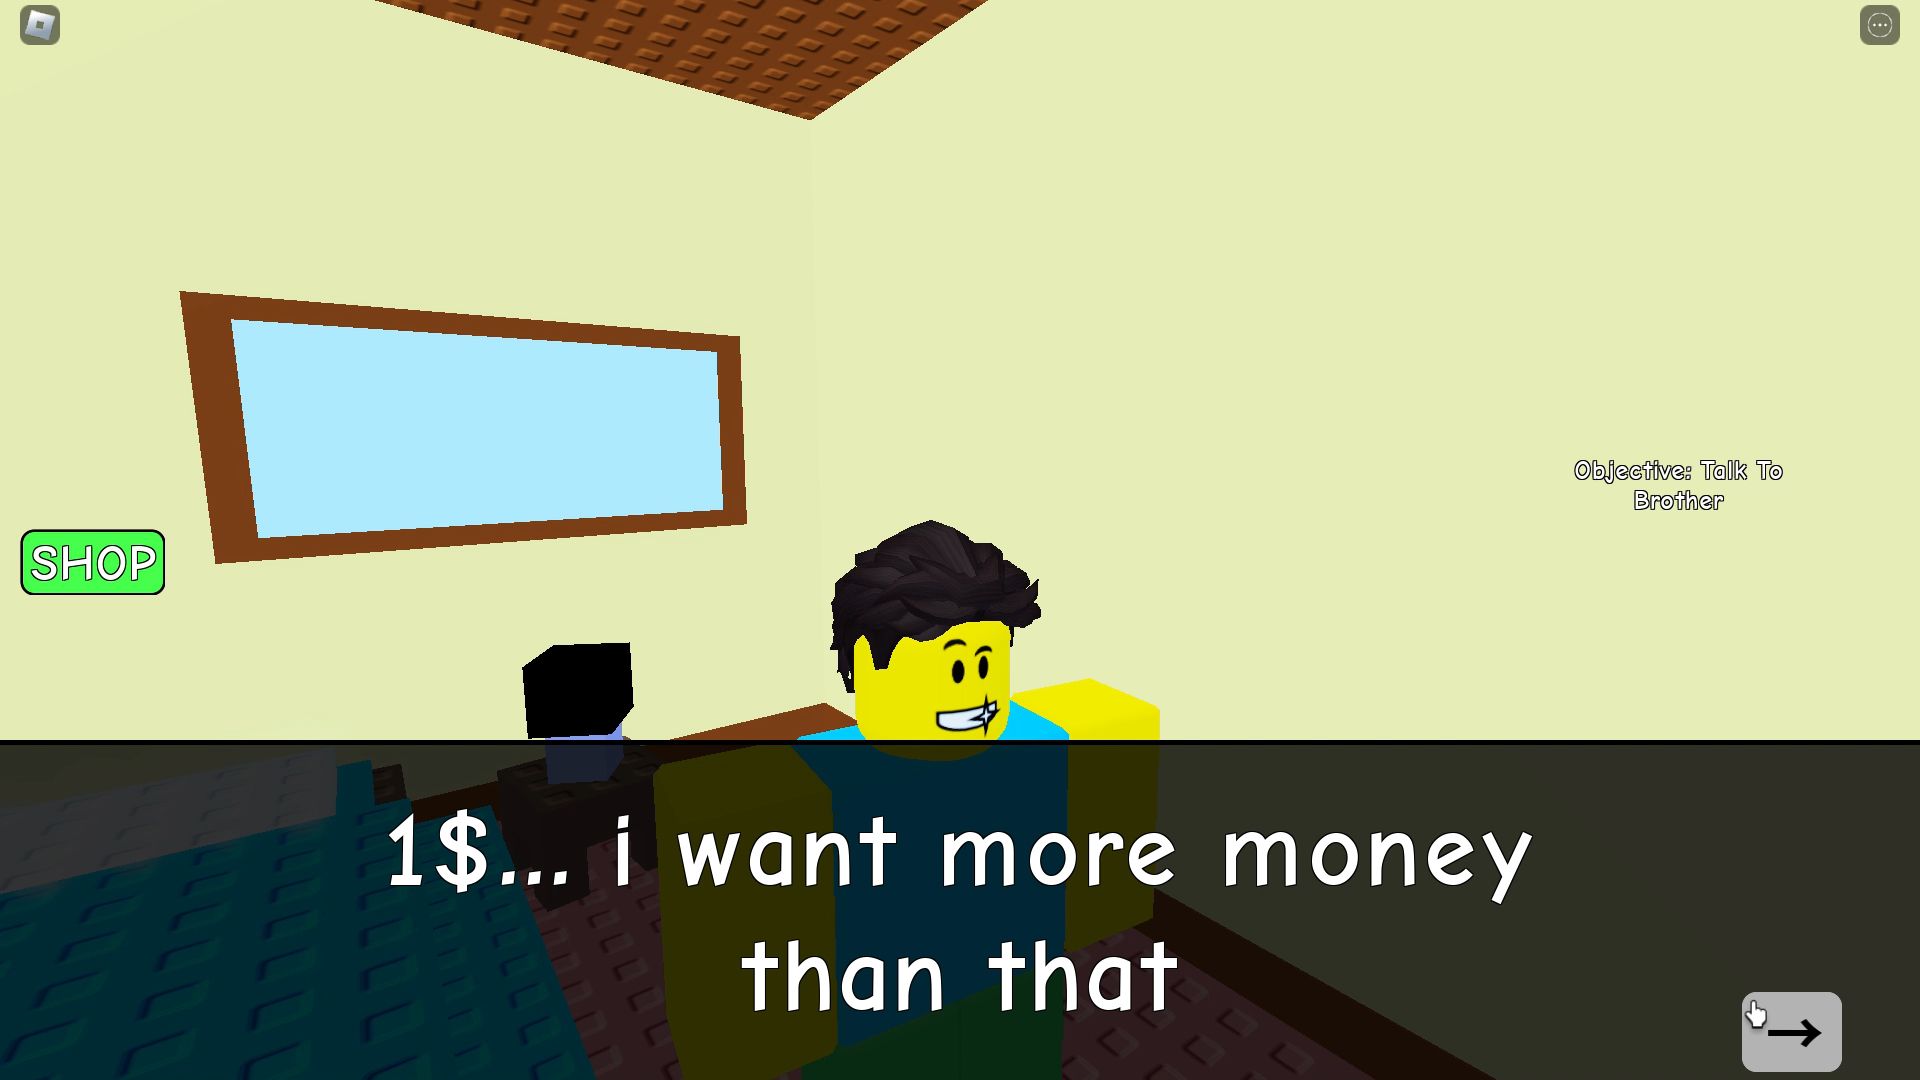 Roblox Need More Money - Talking to Brother